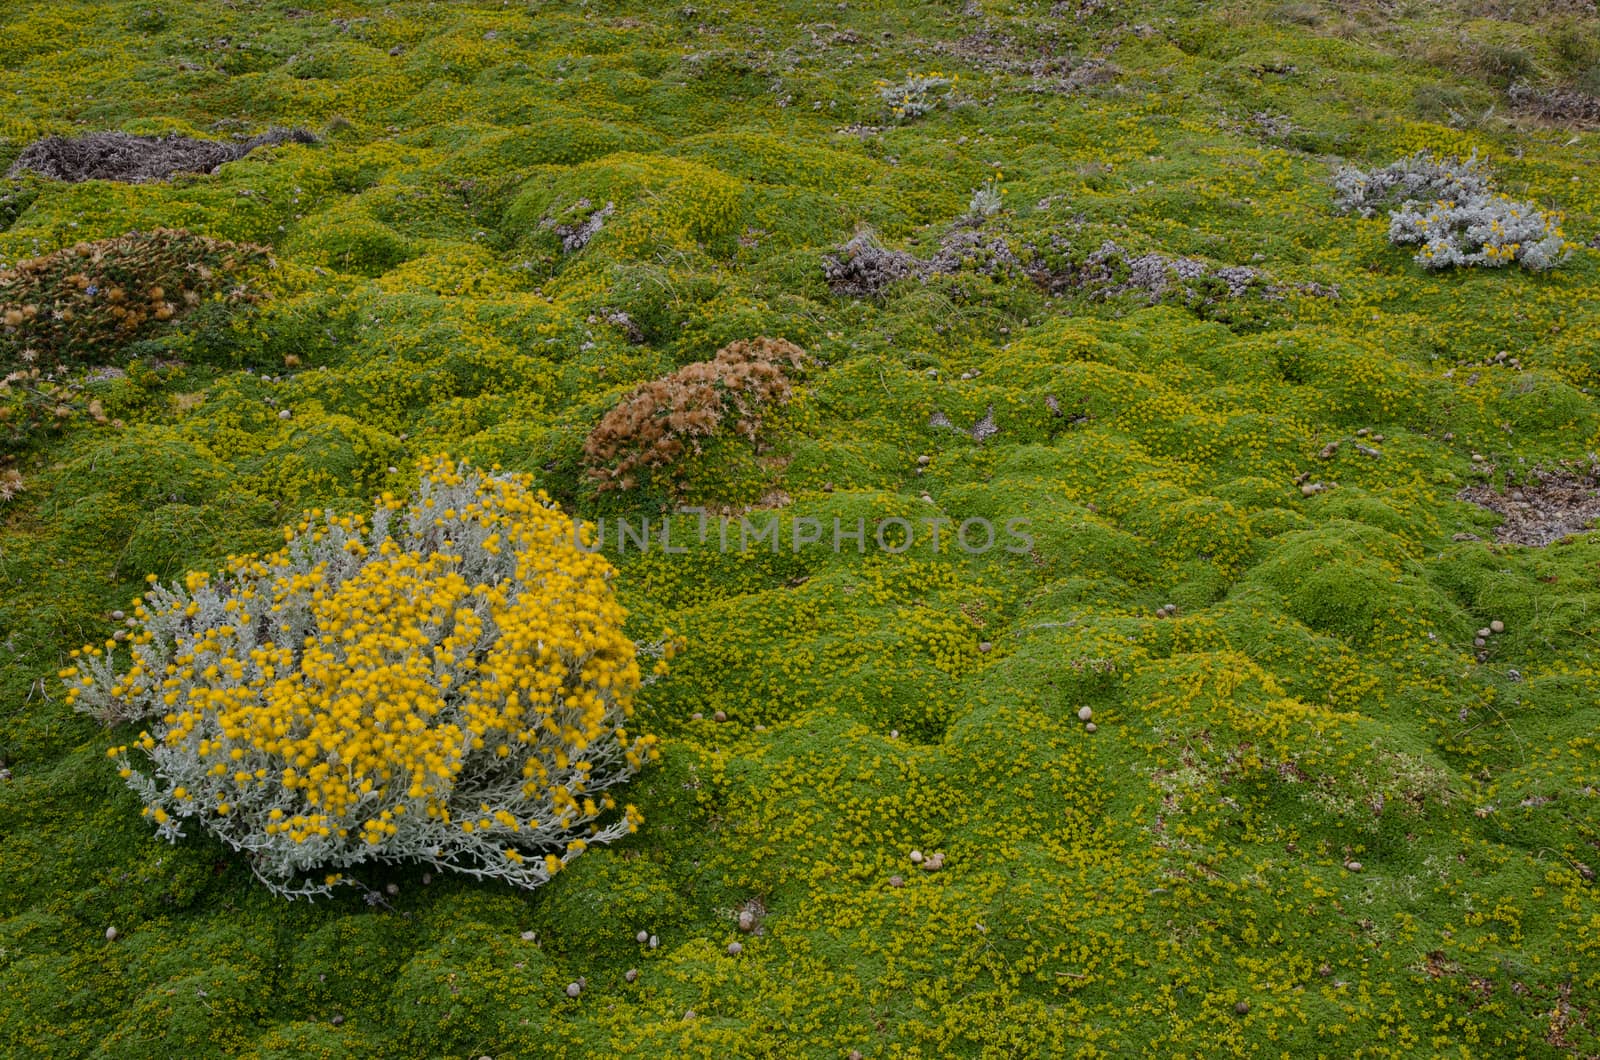 Plant of Senecio sp. in flowering and ground covered by vegetation. by VictorSuarez